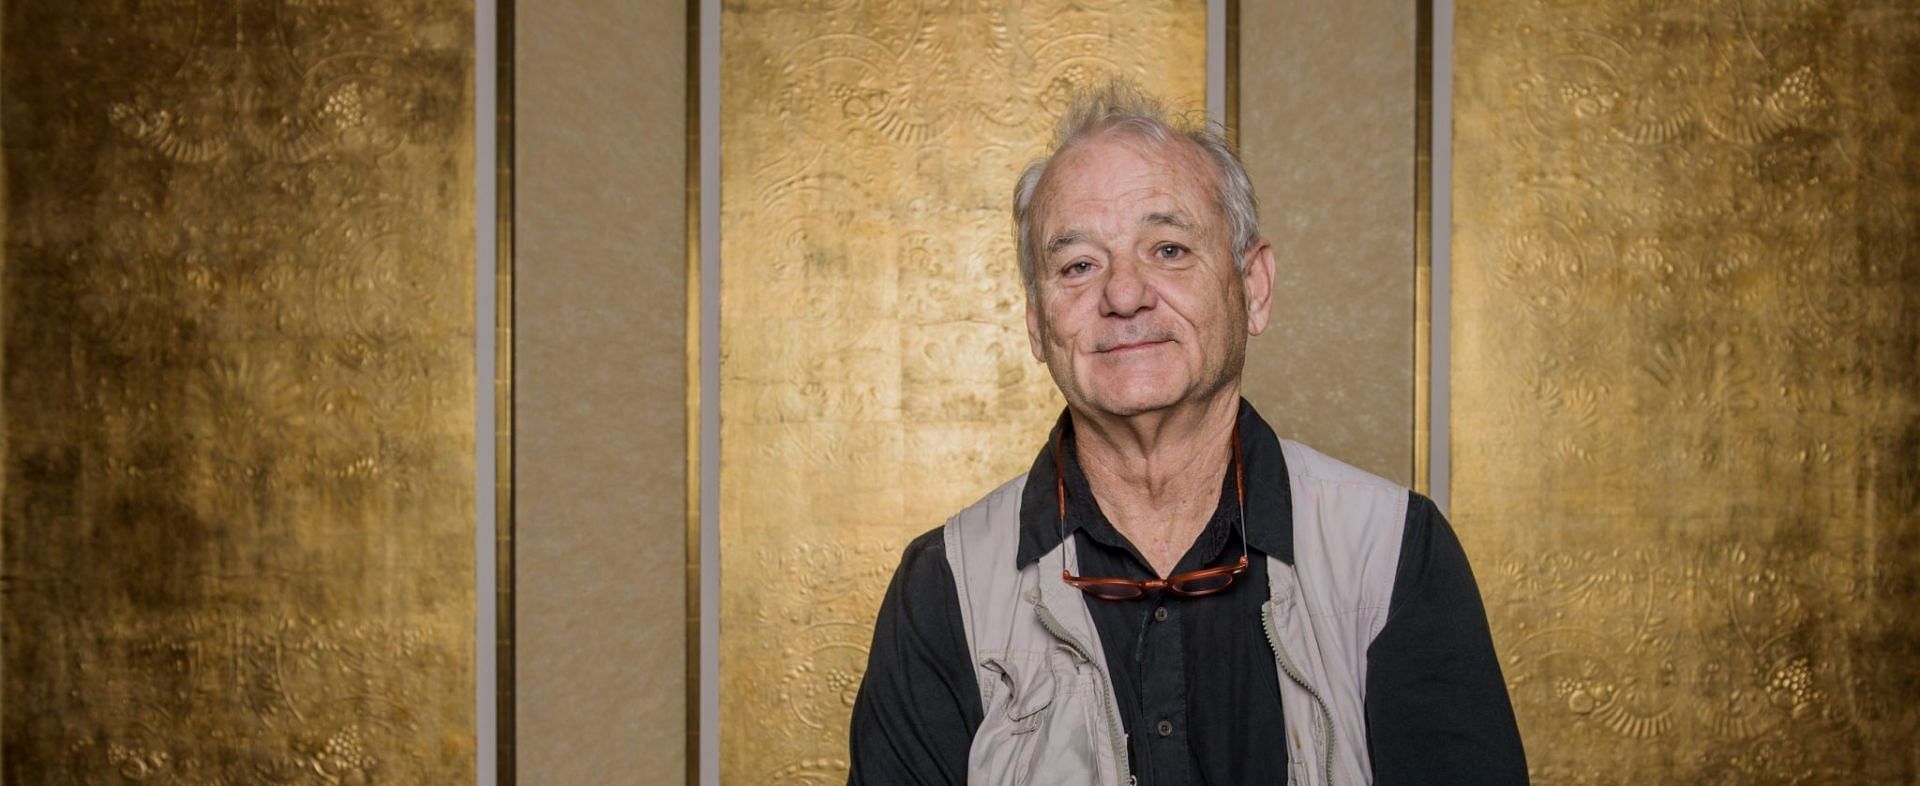 Twitter called out Bill Murray over his past inappropriate on-set behavior (Image via Stefan Hoederath/Getty Images)